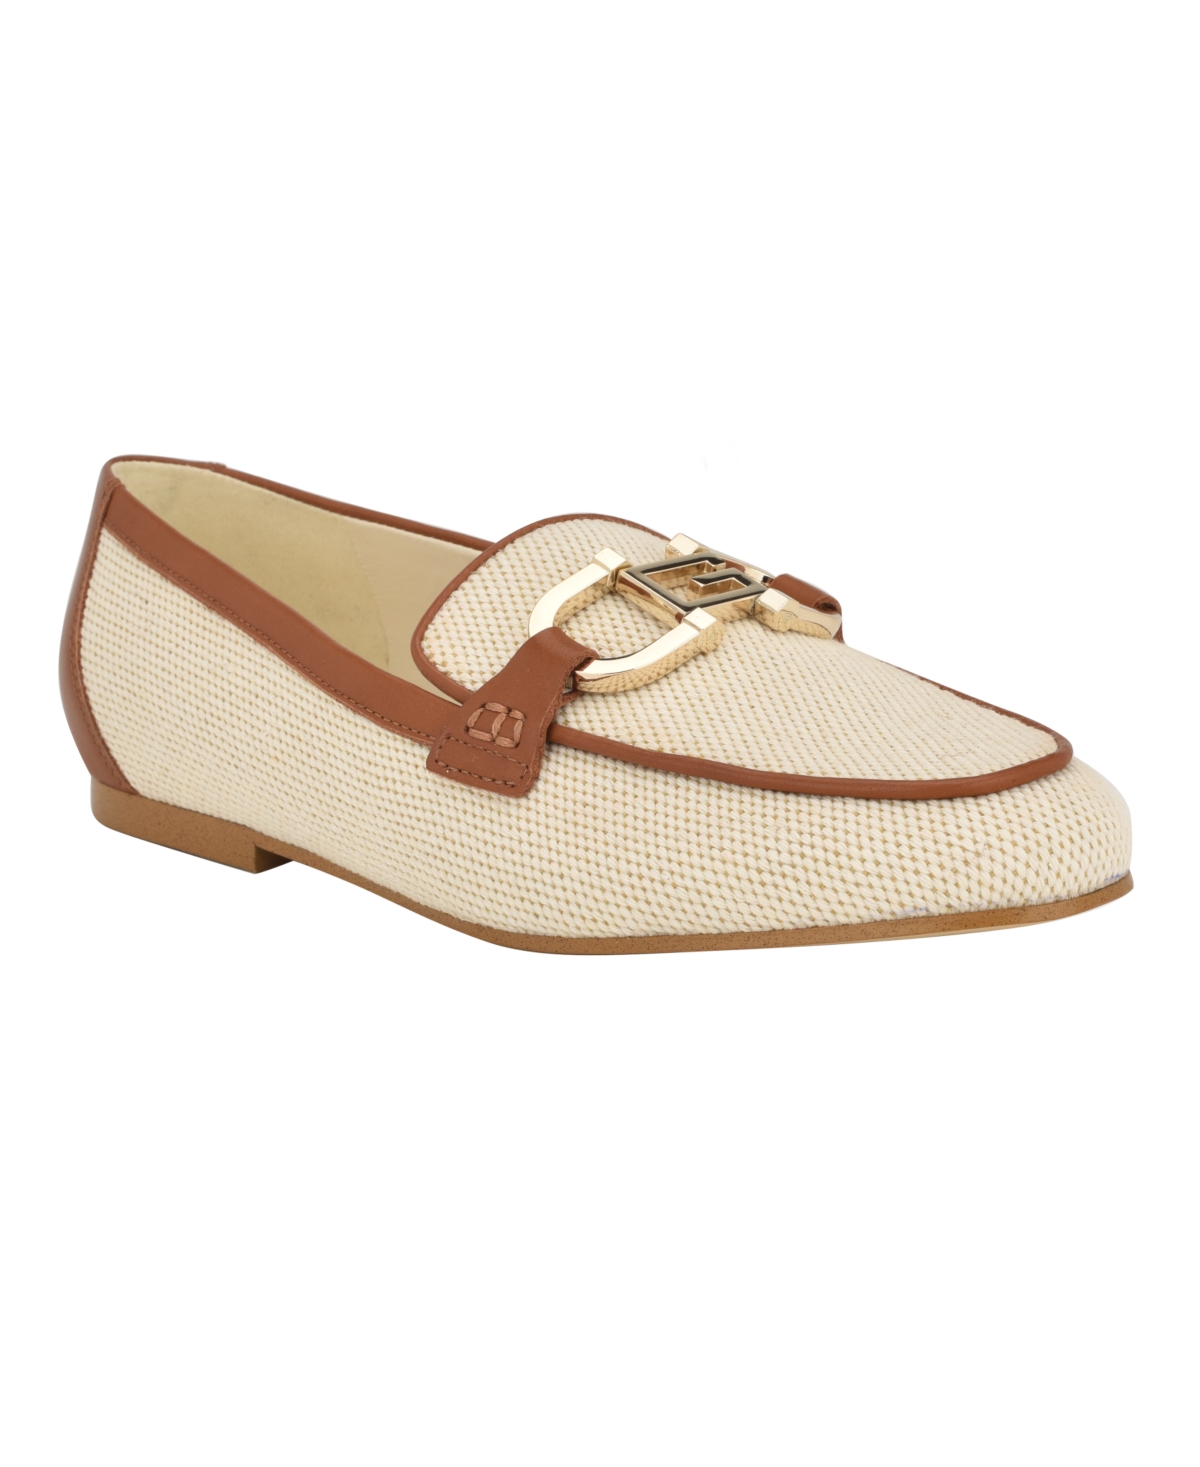 Women's Isaac Slip On Flat Loafers with Hardware - Light Natural, Brown Leather